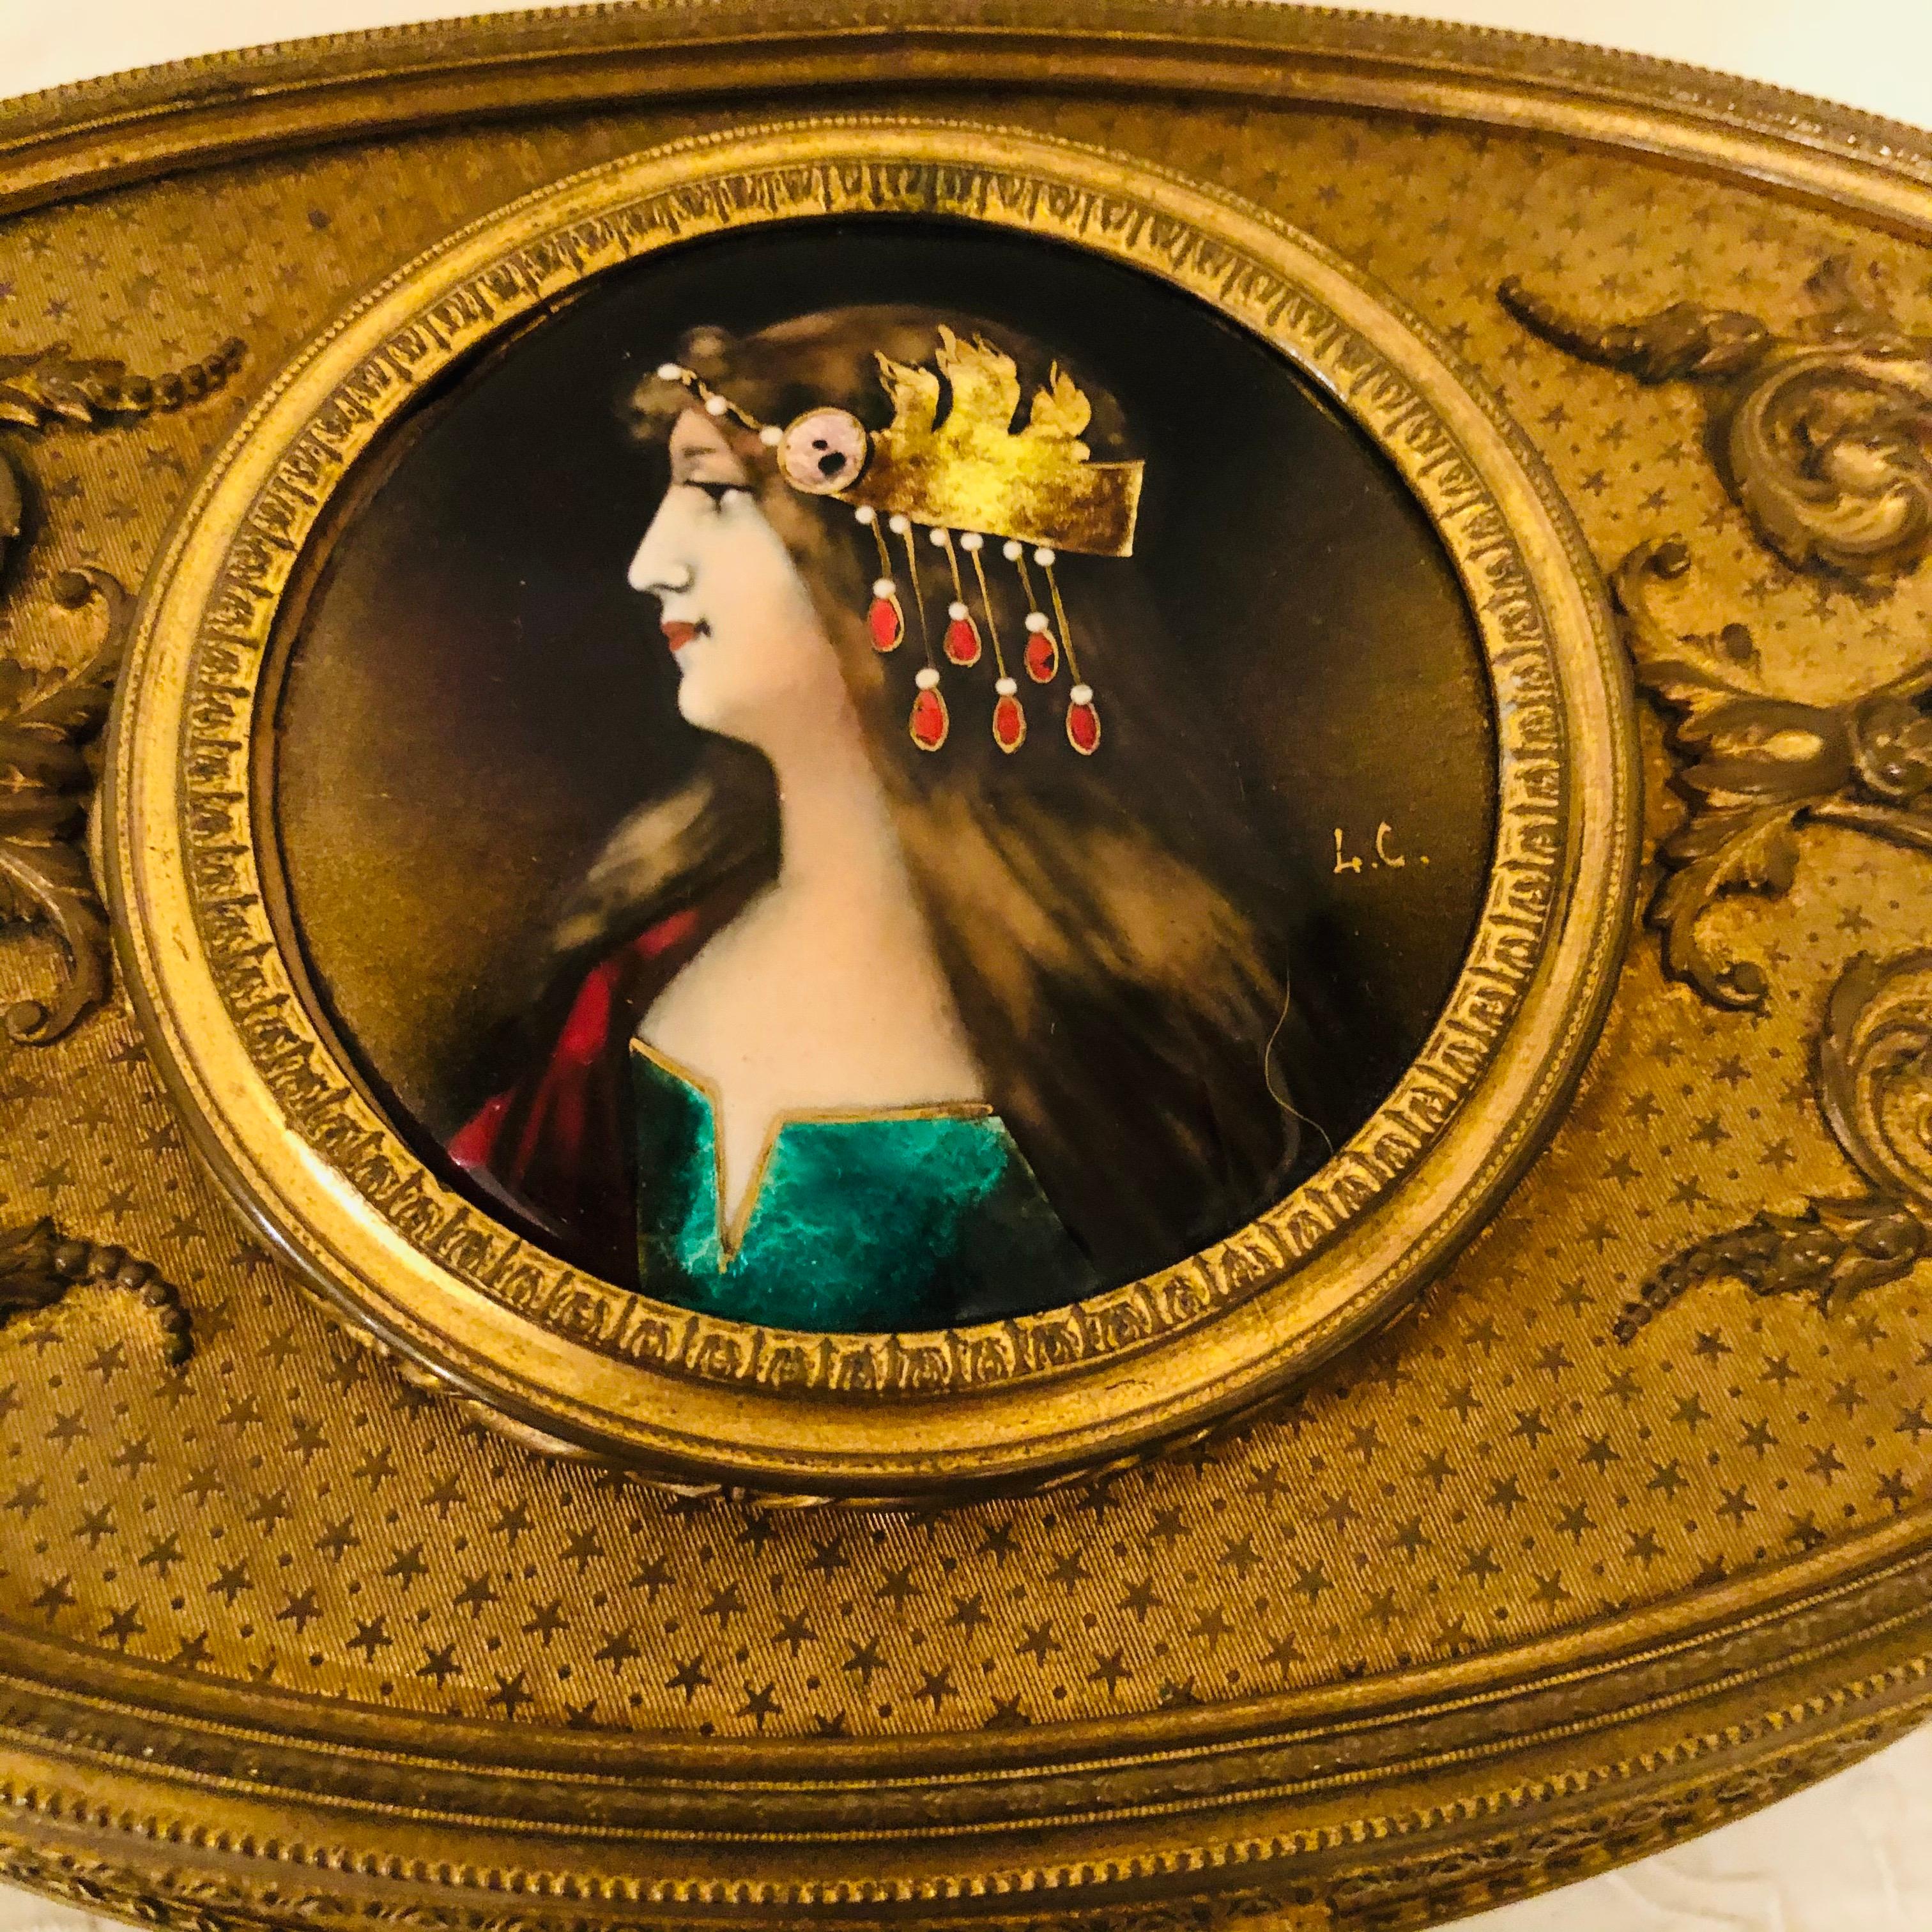 Bronze box with an enamel artist signed portrait of a beautiful lady on four raised feet. It is artist signed L. C. The box has a rose velvet interior. It is from the late 19th century. It is 10.5 inches wide, 7 inches deep and 3.5 inches tall. It